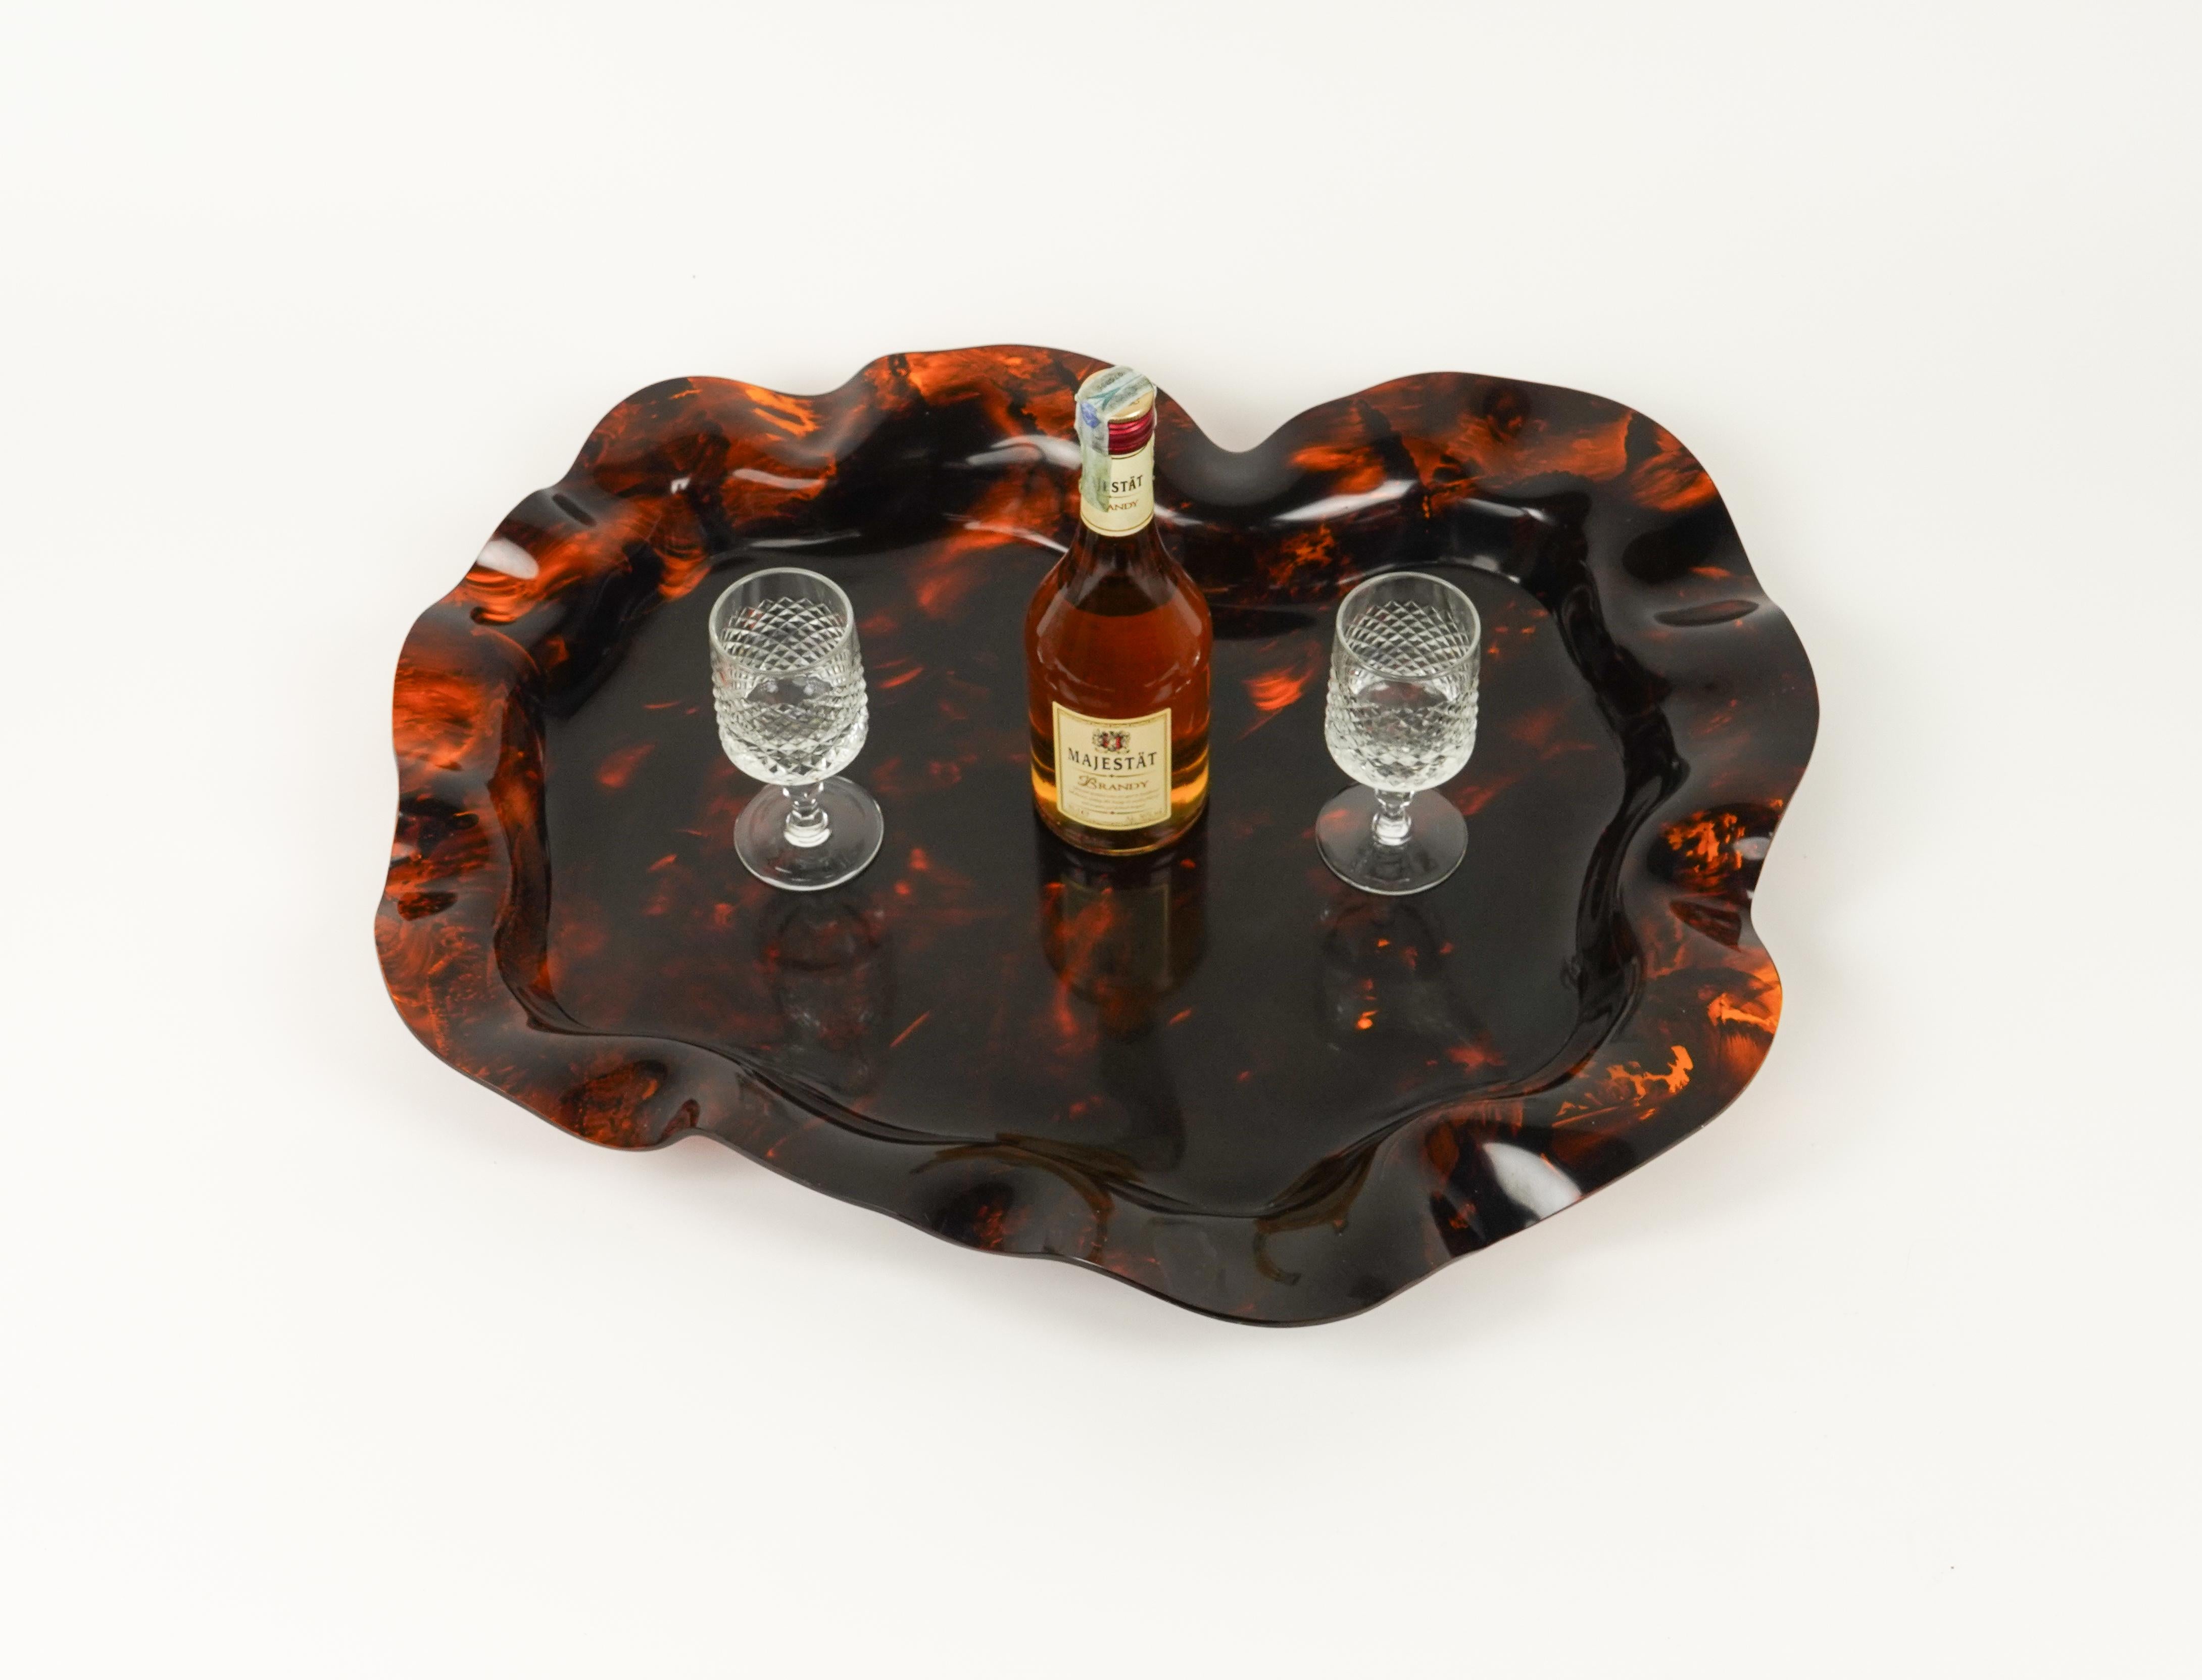 Large Serving Tray or Centerpiece Lucite Faux Tortoiseshell, Italy 1970s For Sale 2